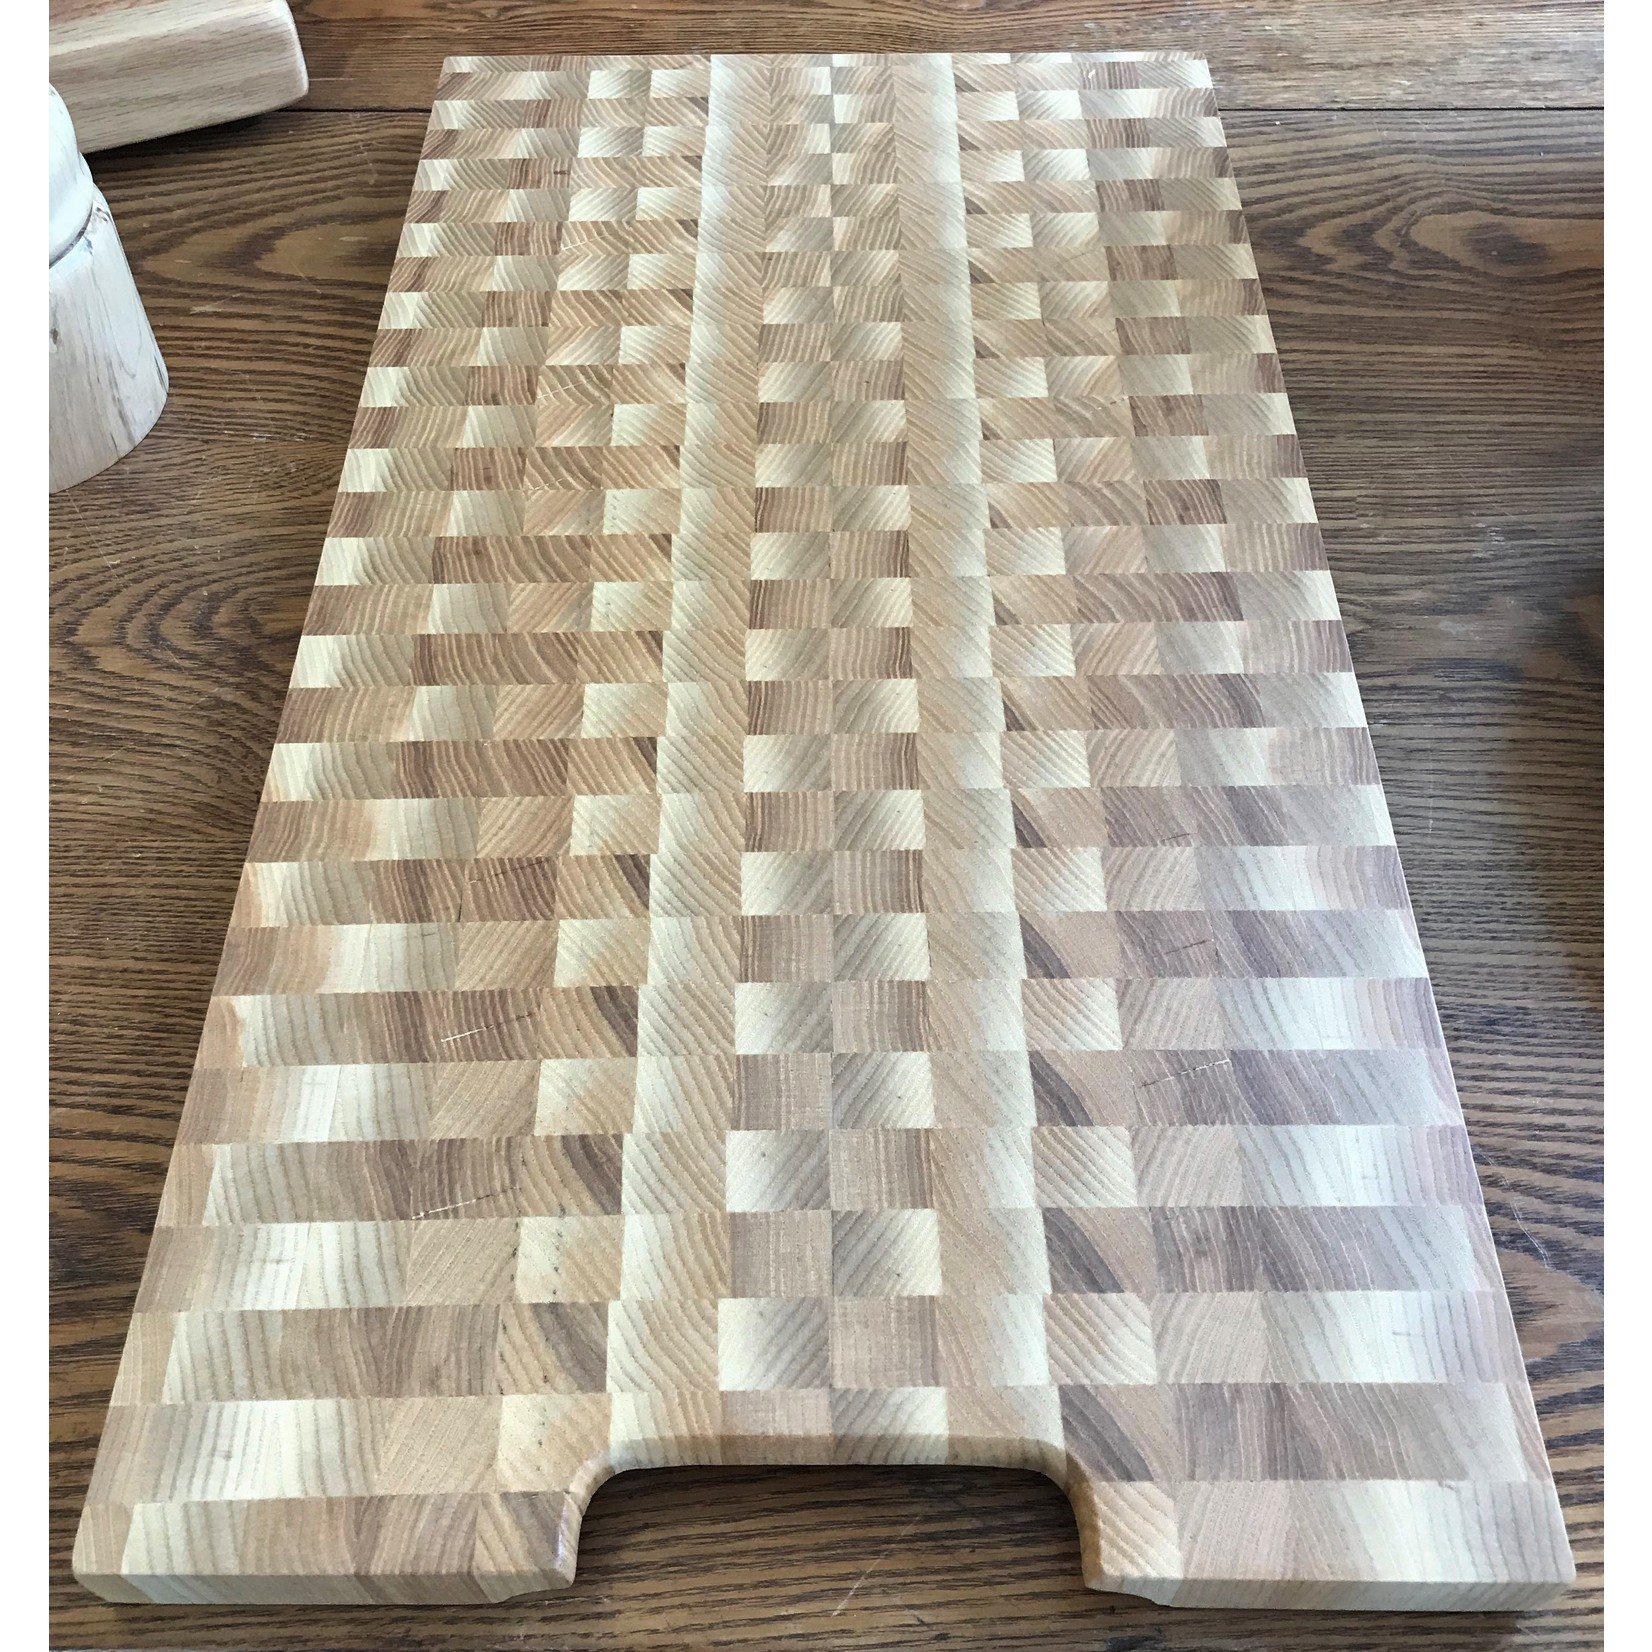 Custom Griddle Inset Cover